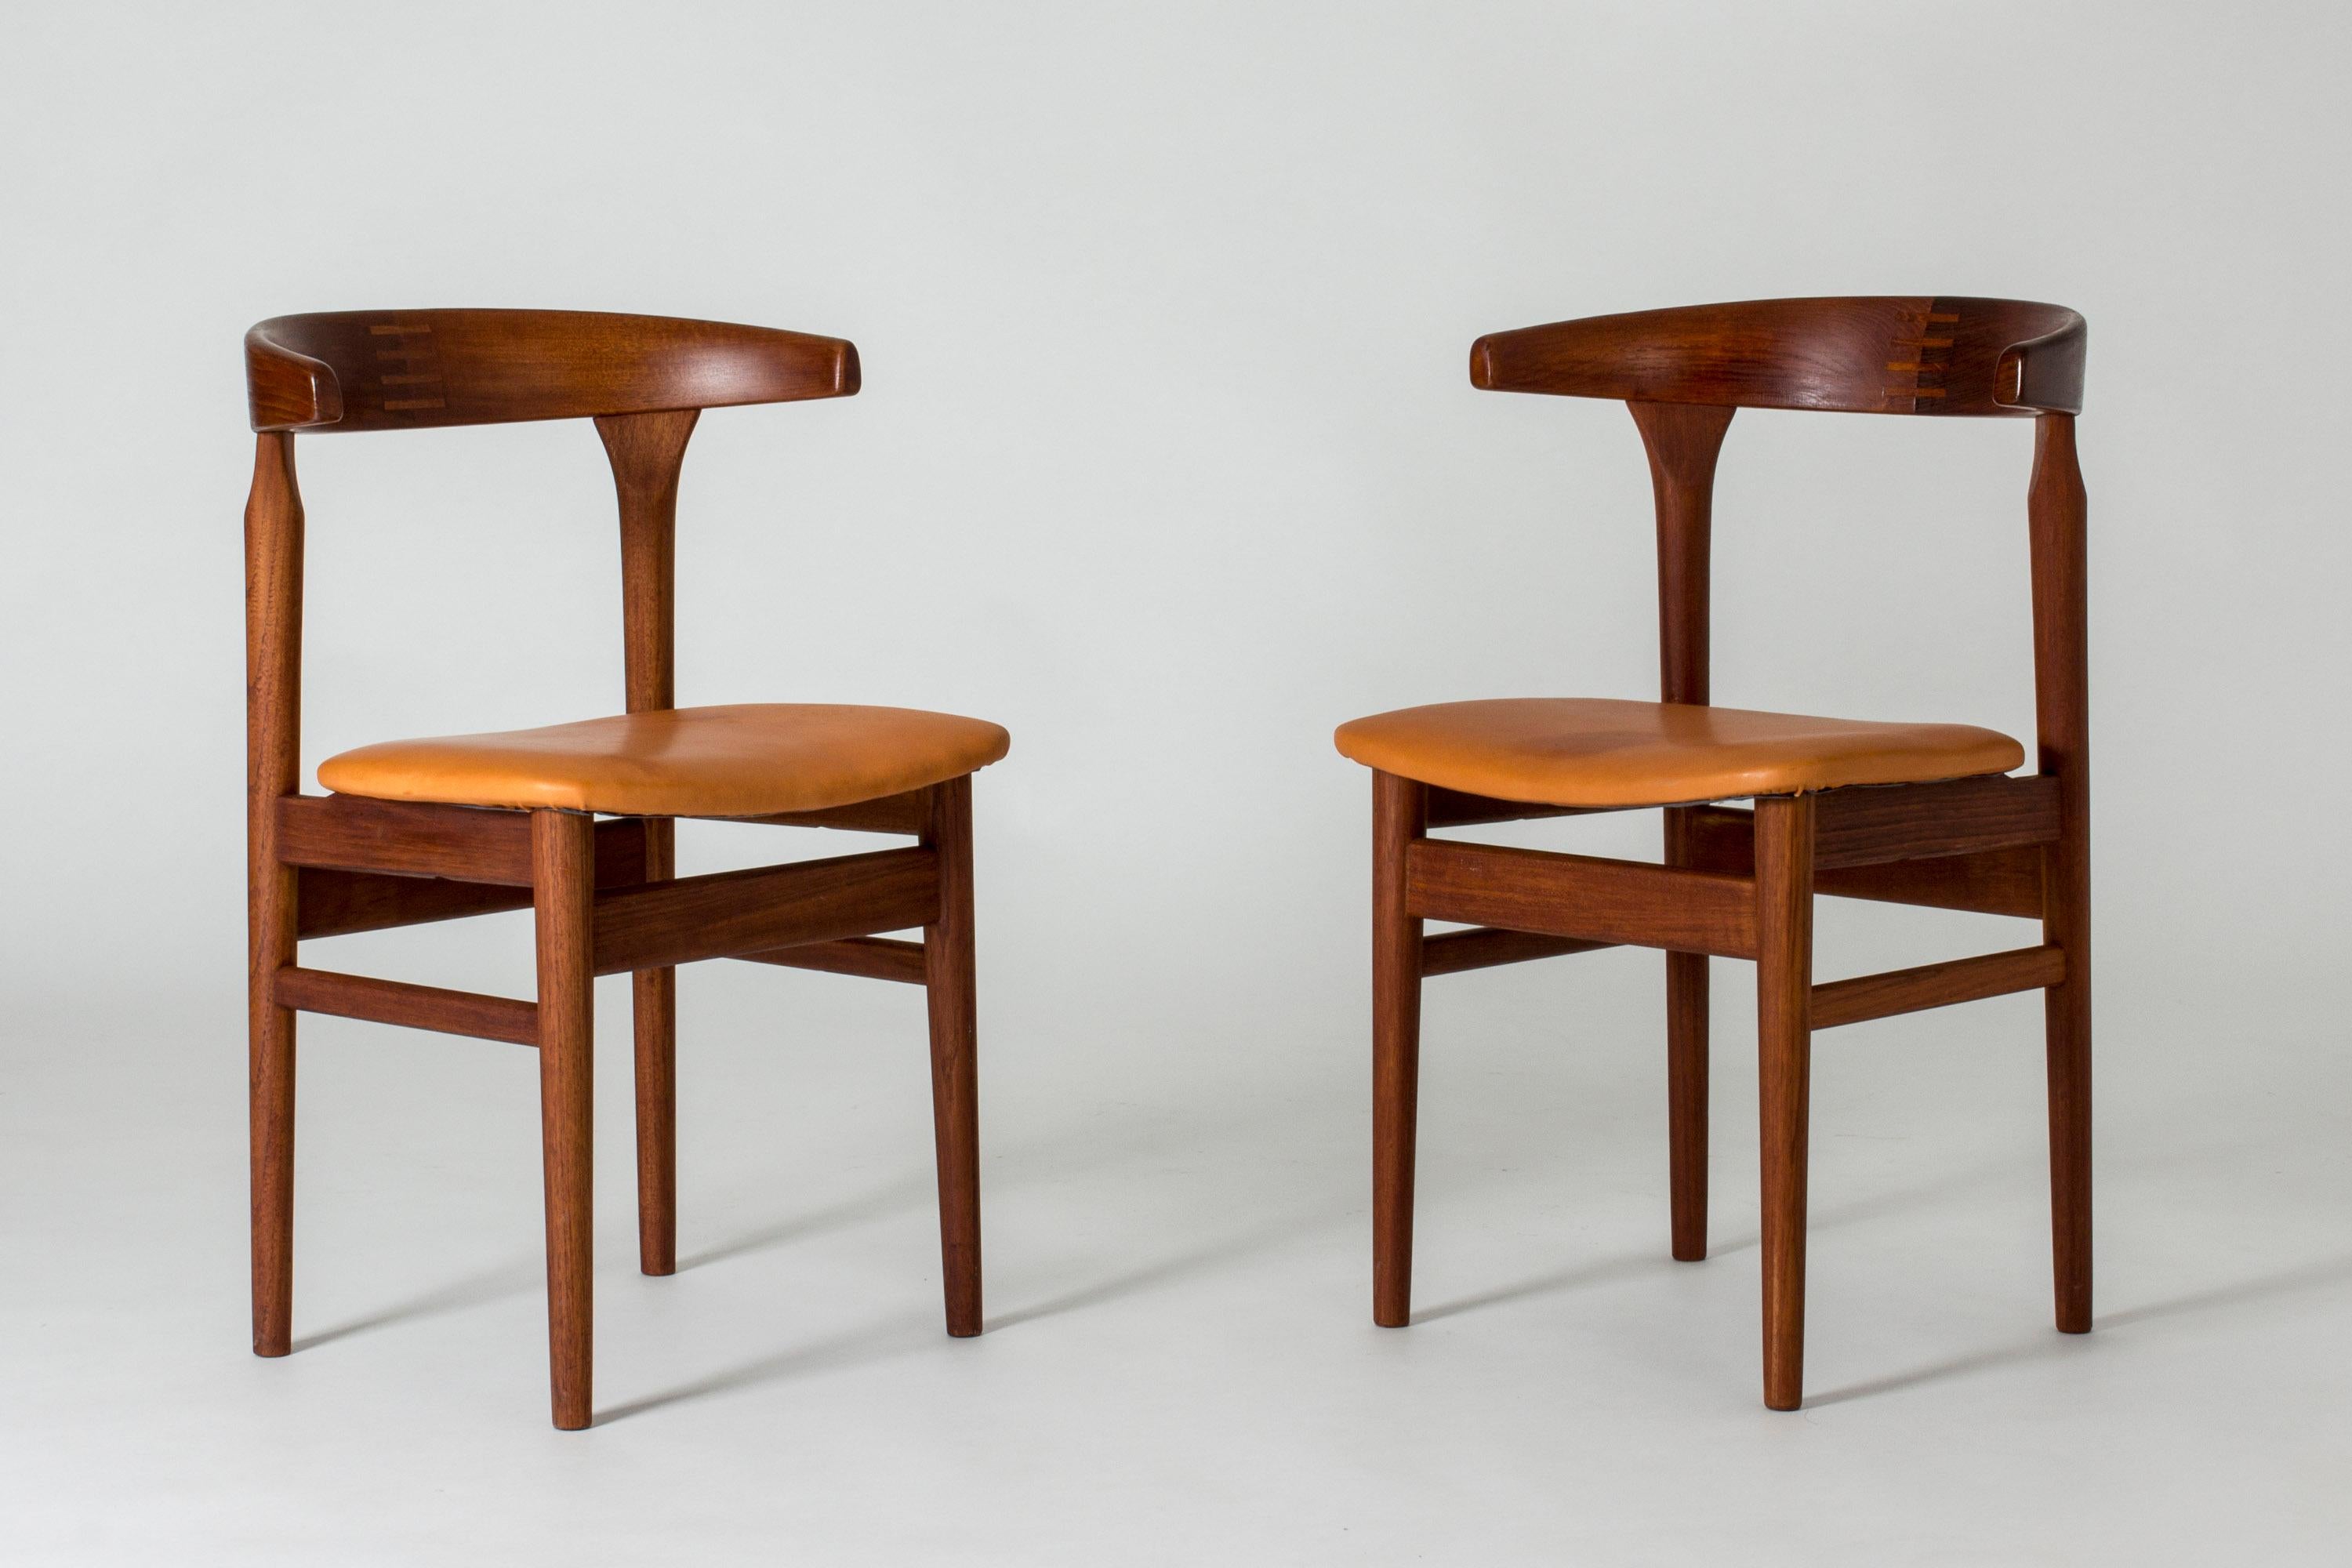 Set of six amazing “cowhorn” chairs by Torbjørn Afdal. Made from teak with beautiful details. Seats upholstered with patinated natural leather, vegetable tanned and of very high quality.